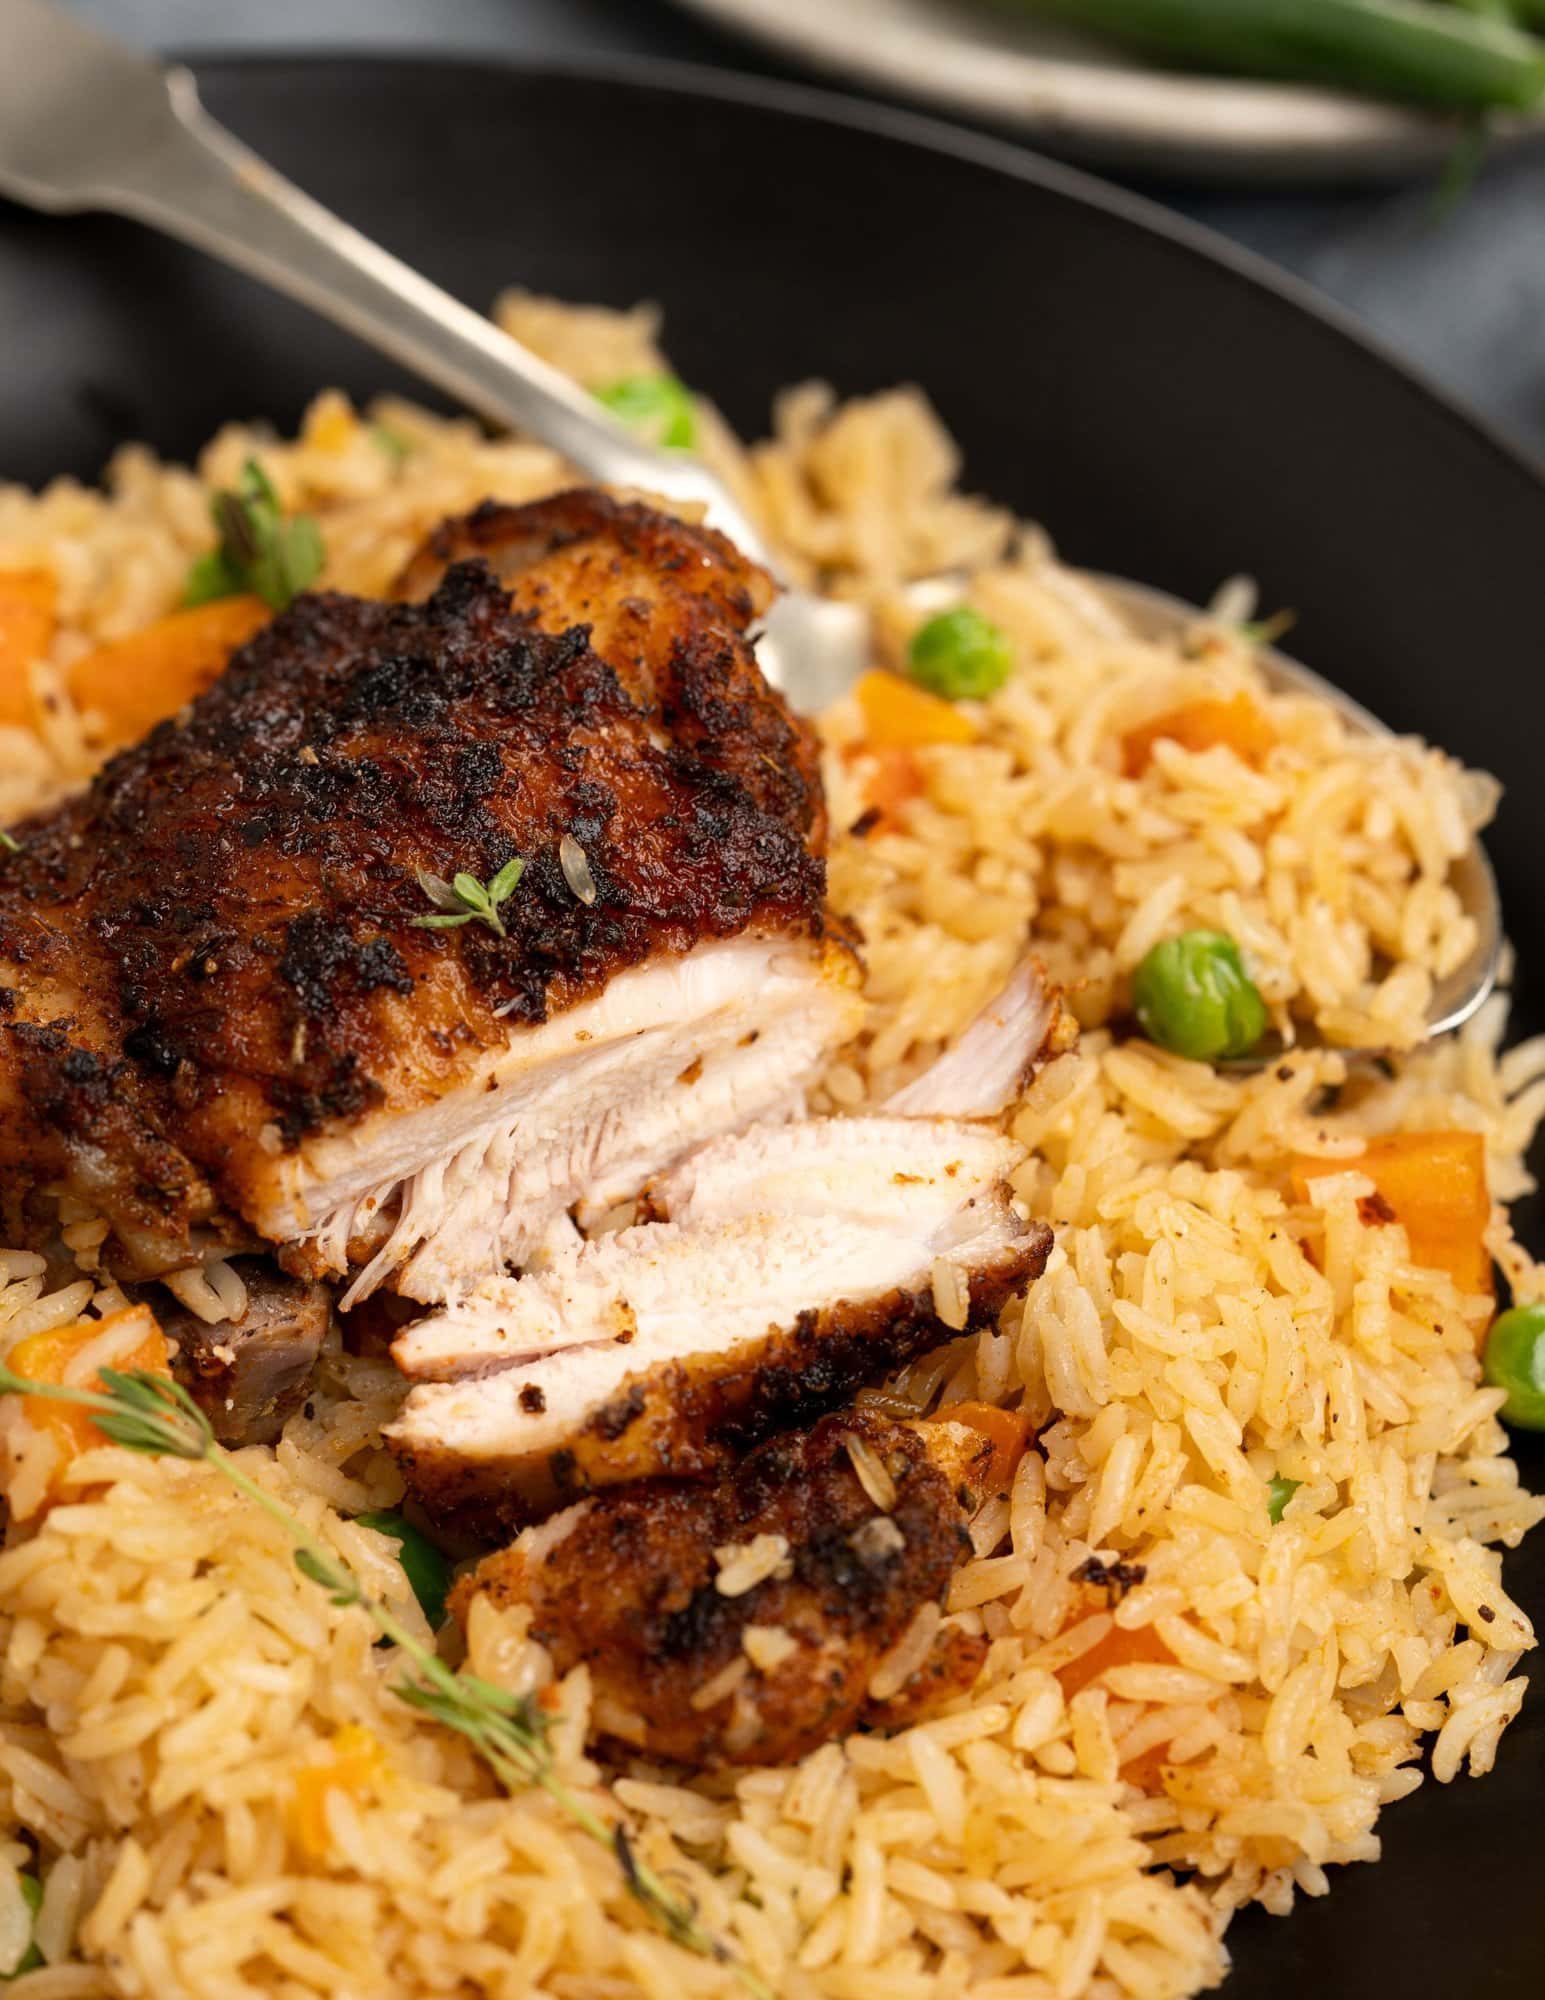 Close up image shows tender chicken cut from a crisp top thigh that was baked with rice.